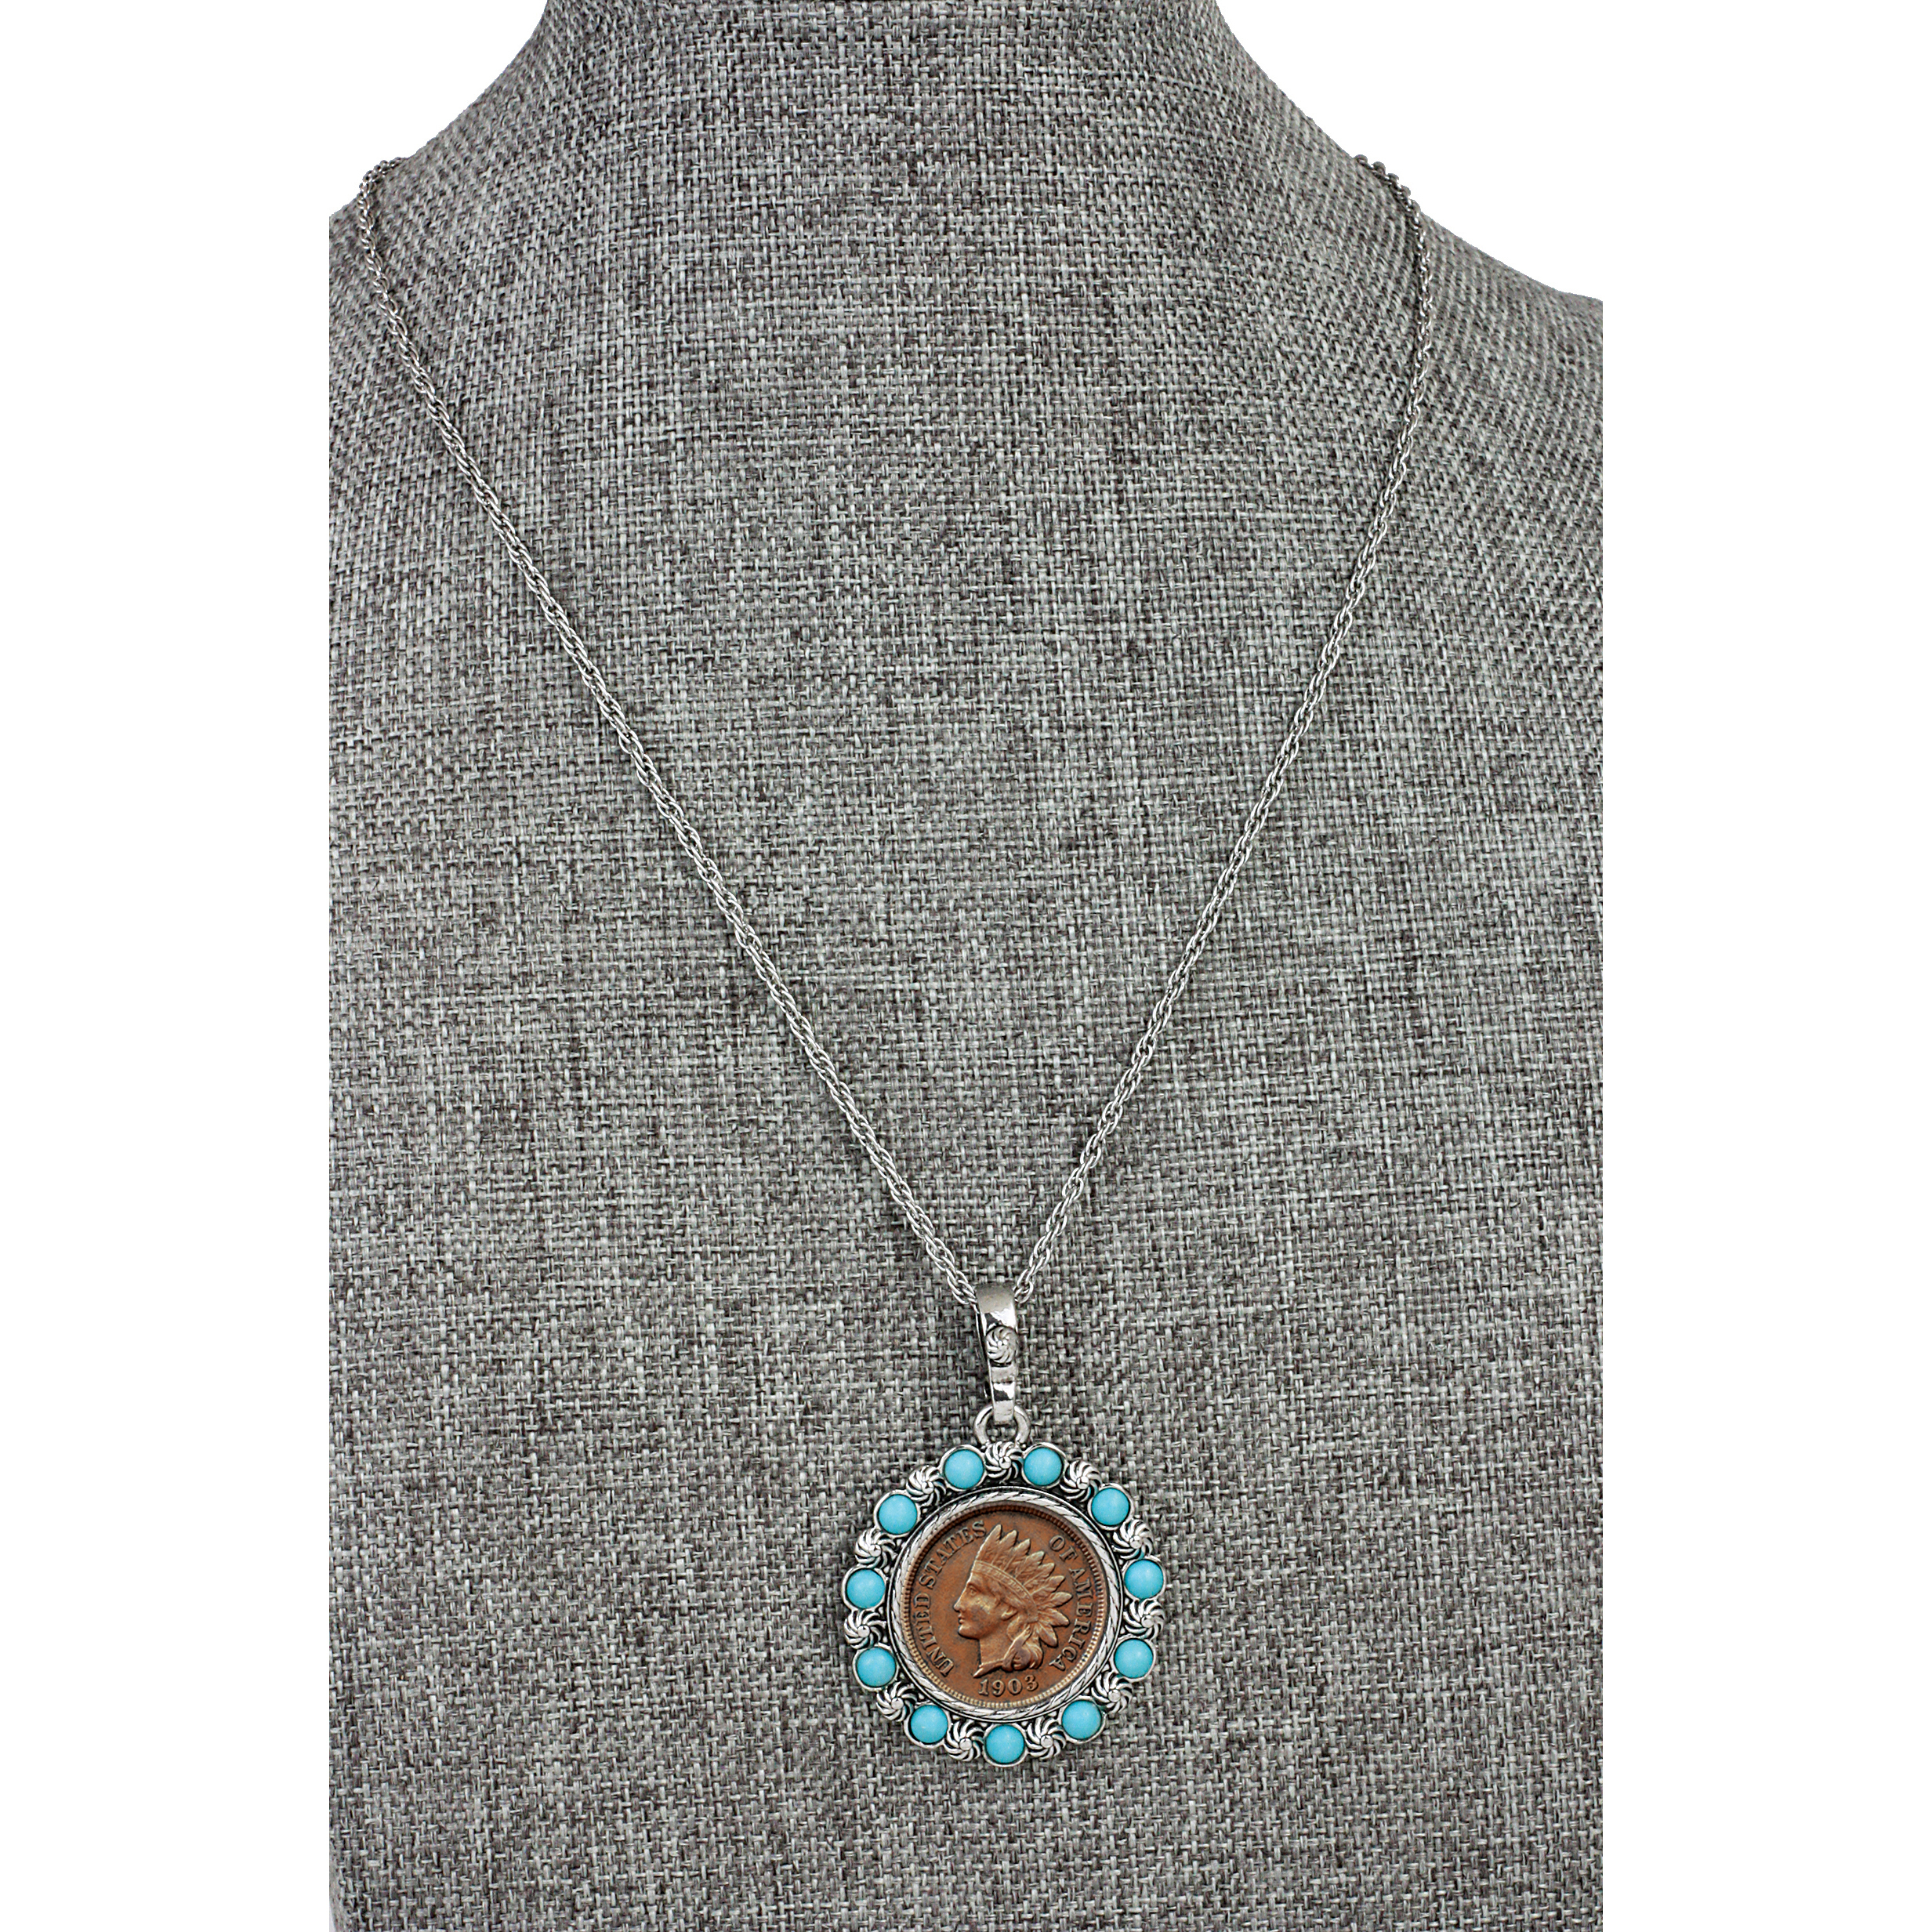 American Indian Head Penny Coin Pendant with Real Turquoise Beads